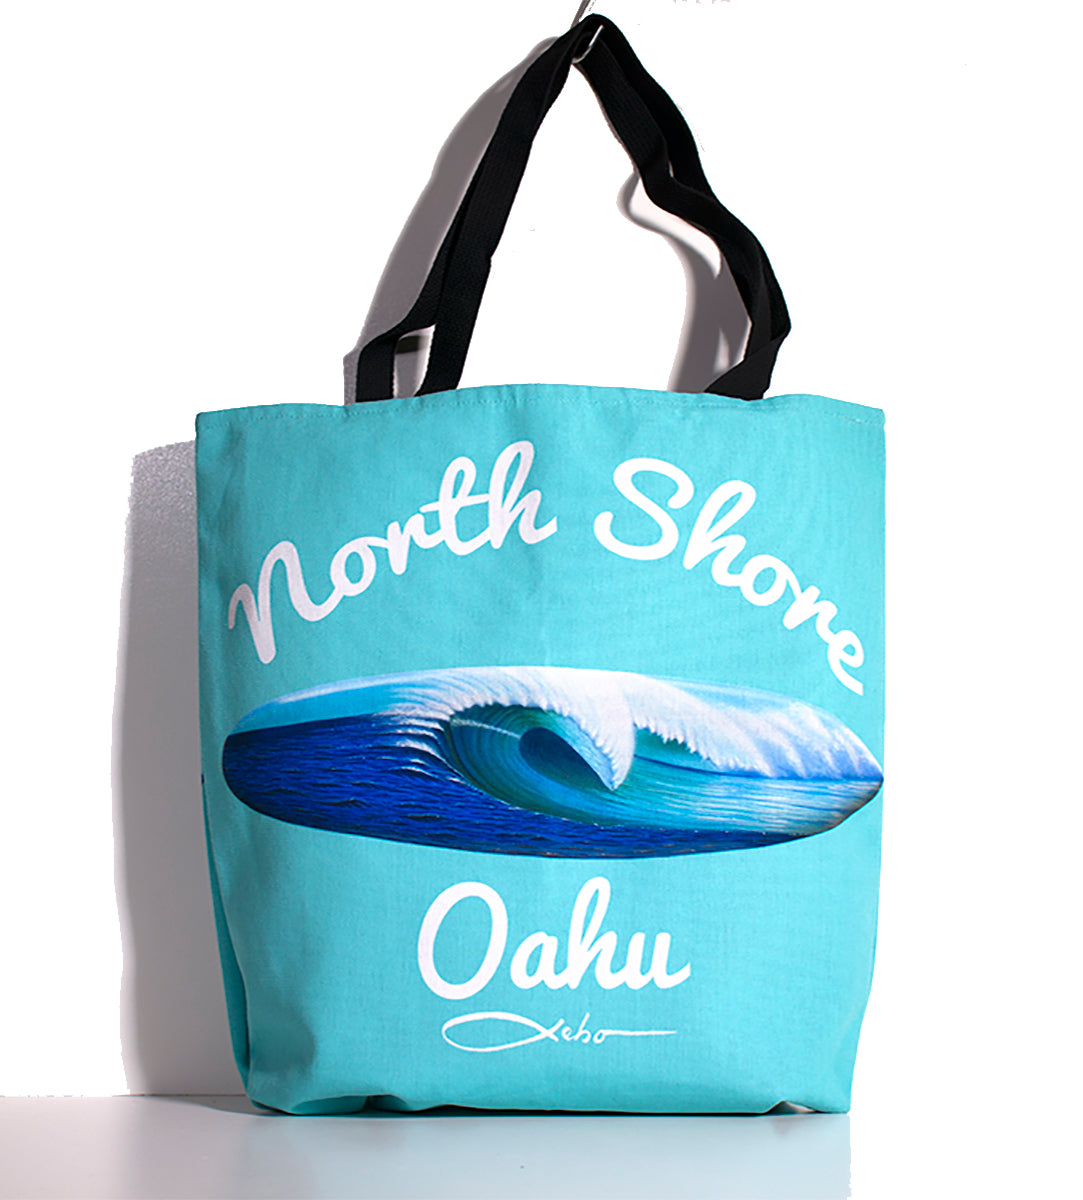 Tote Bags from $39 - SeboArt.com